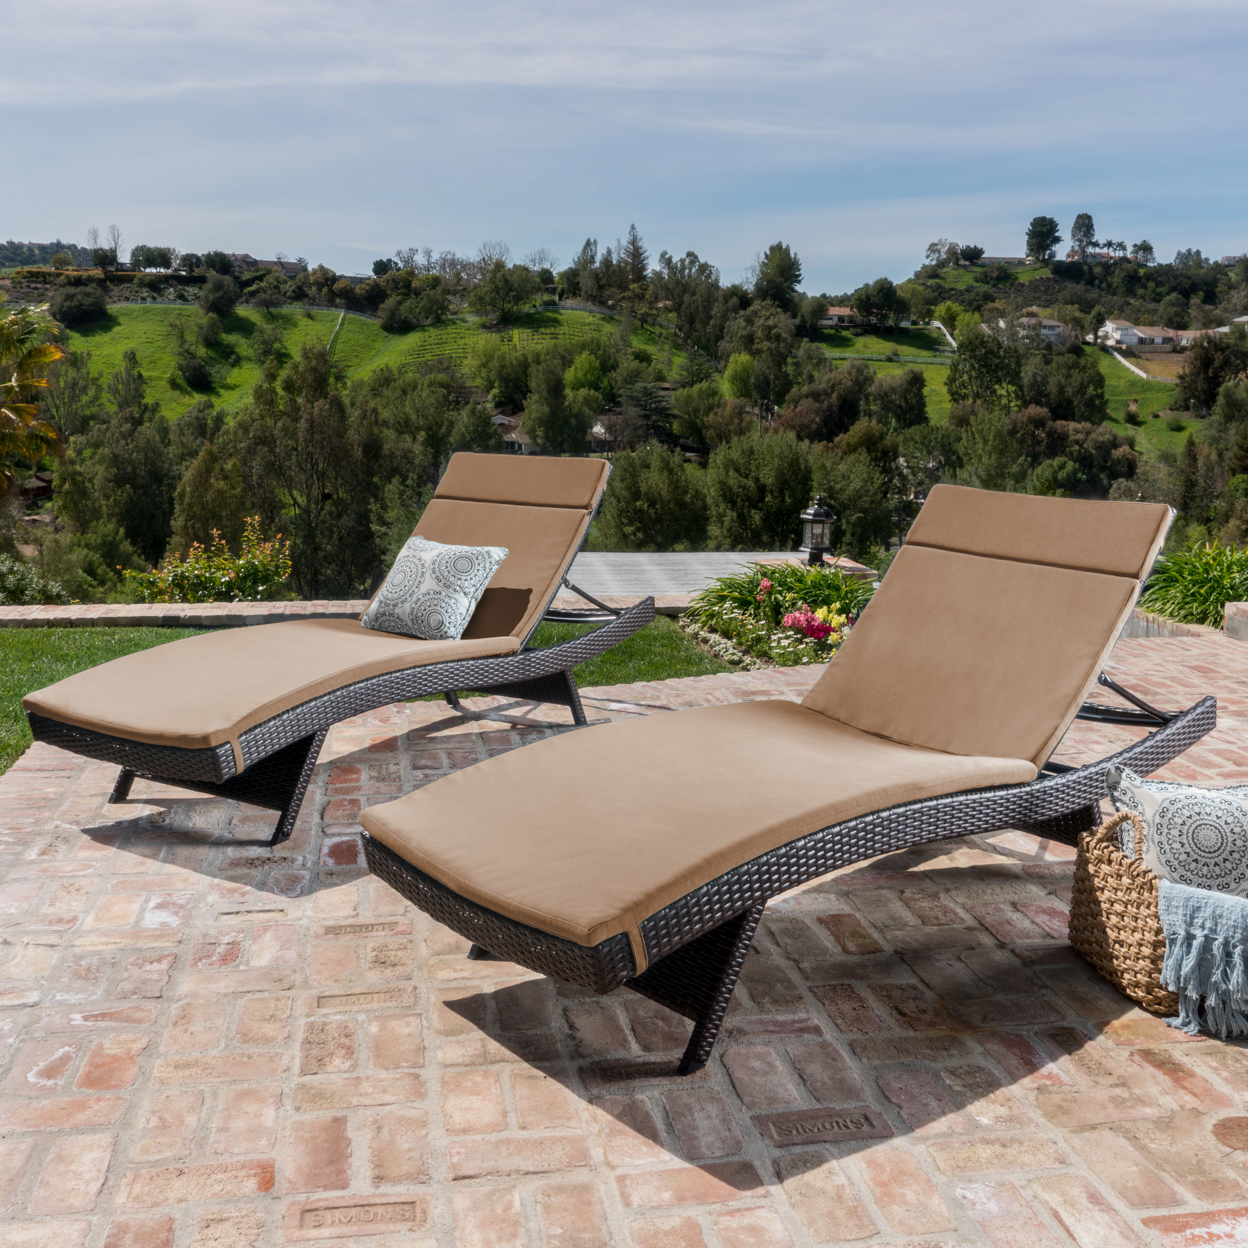 Lakeport Outdoor Adjustable Chaise Lounge Chairs With Cushions (set Of 2) - Caramel Cushion